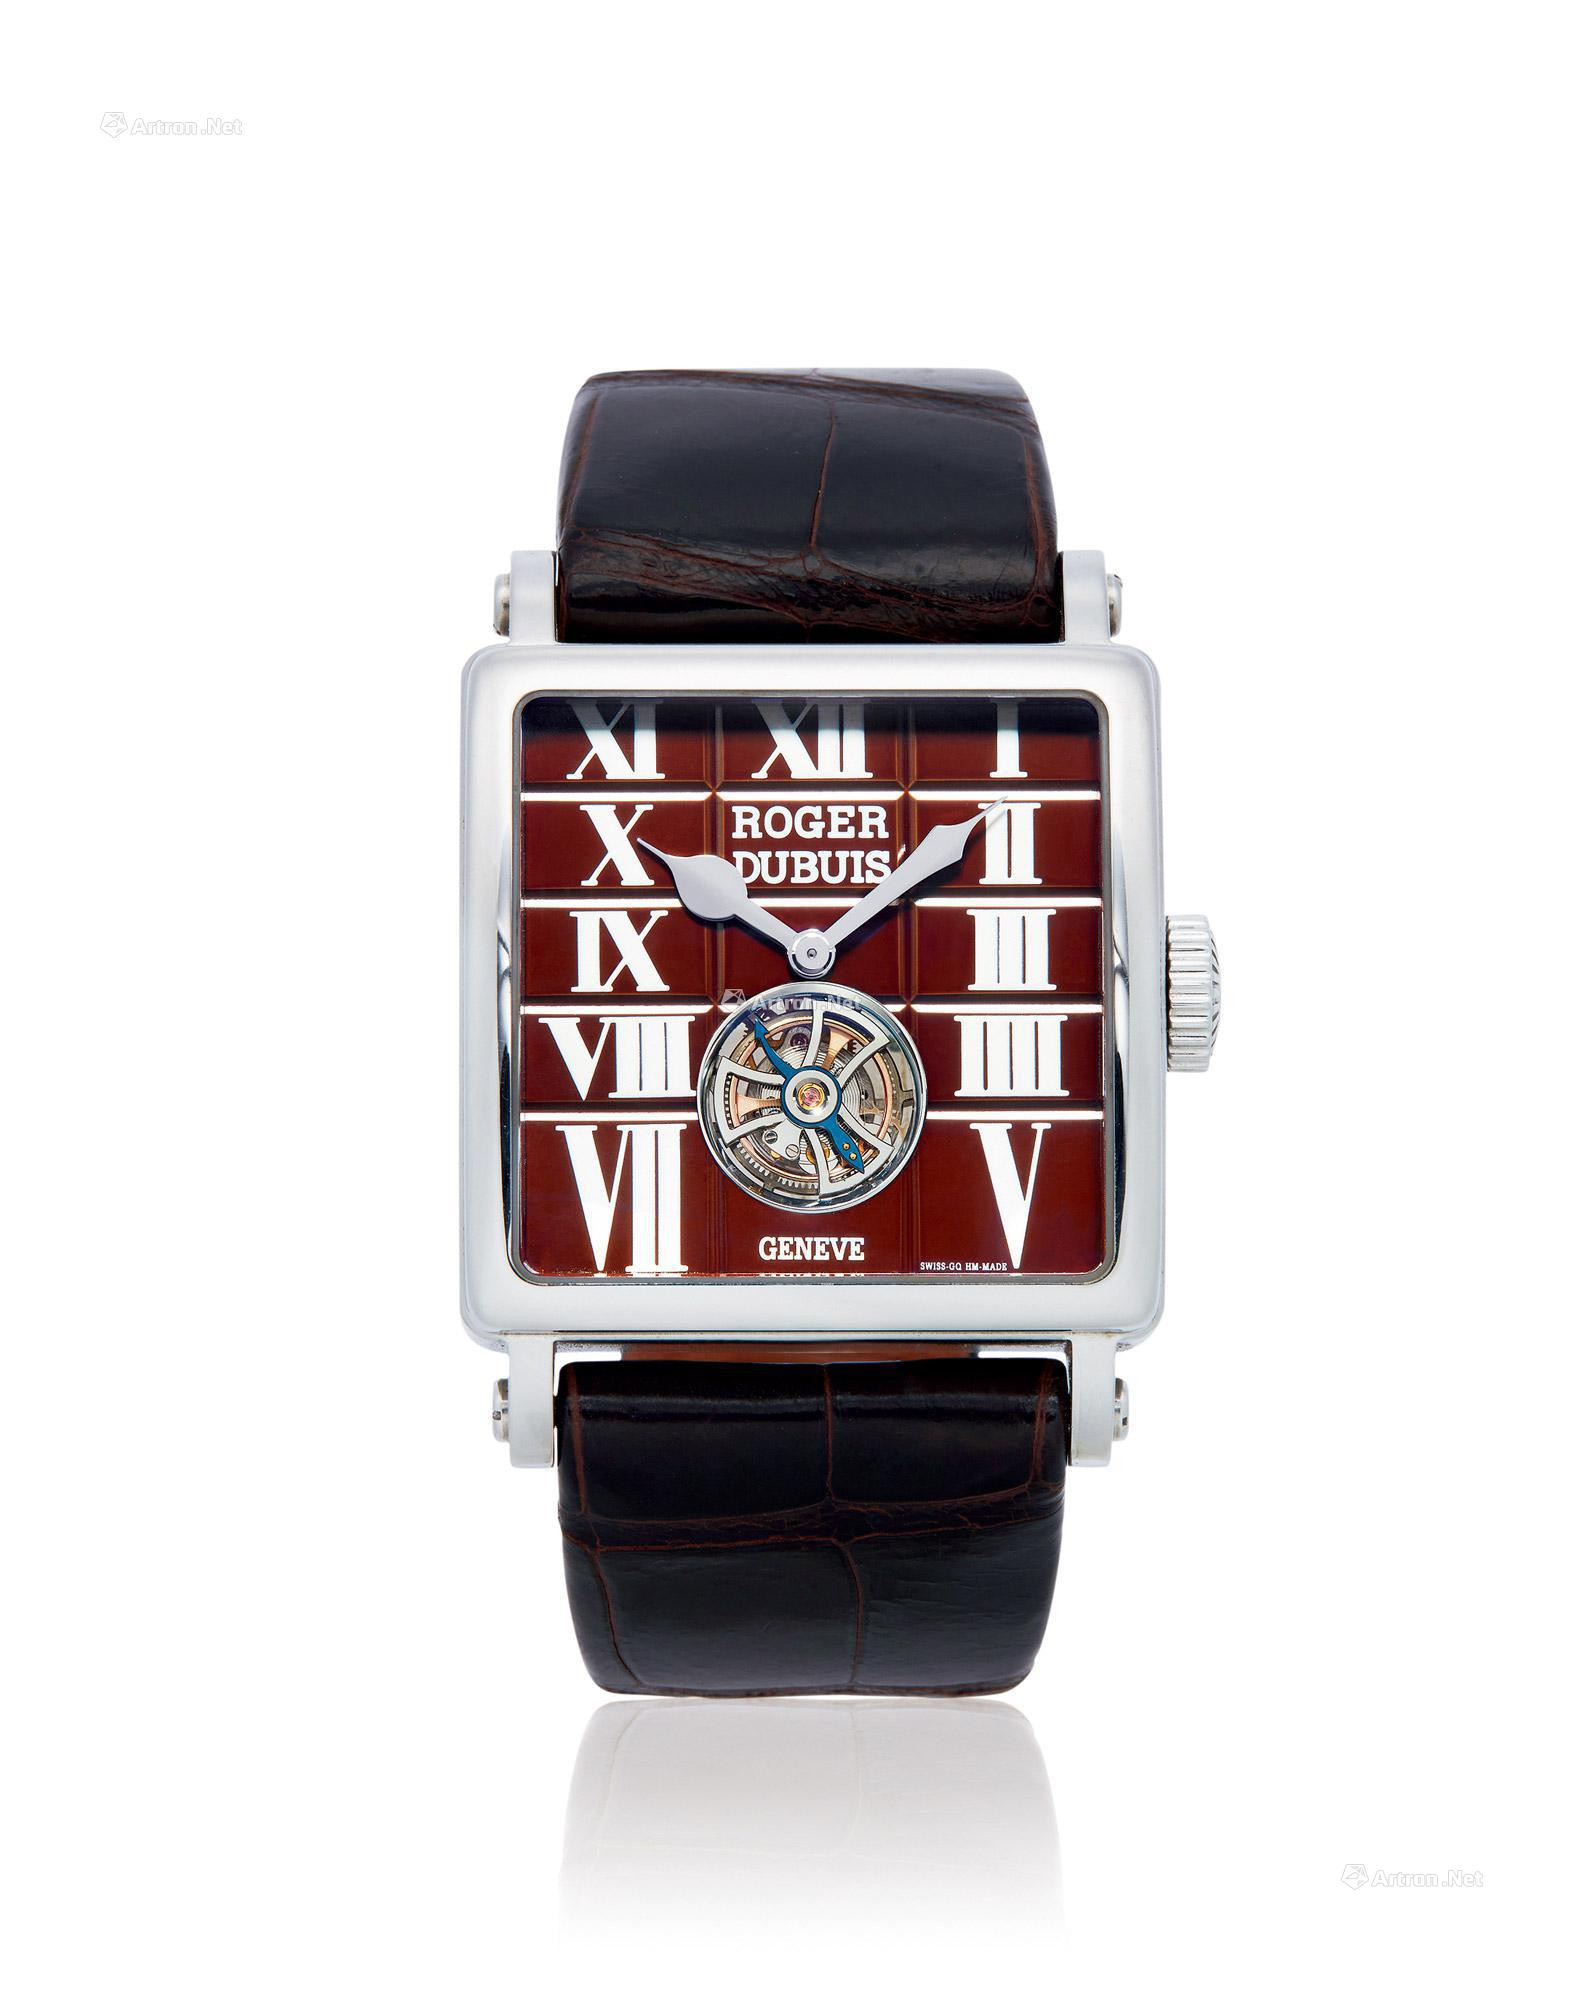 ROGER DUBUIS  A FINE LIMITED EDITION STAINLESS STEEL SQUARE-SHAPED TOURBILLON WRISTWATCH